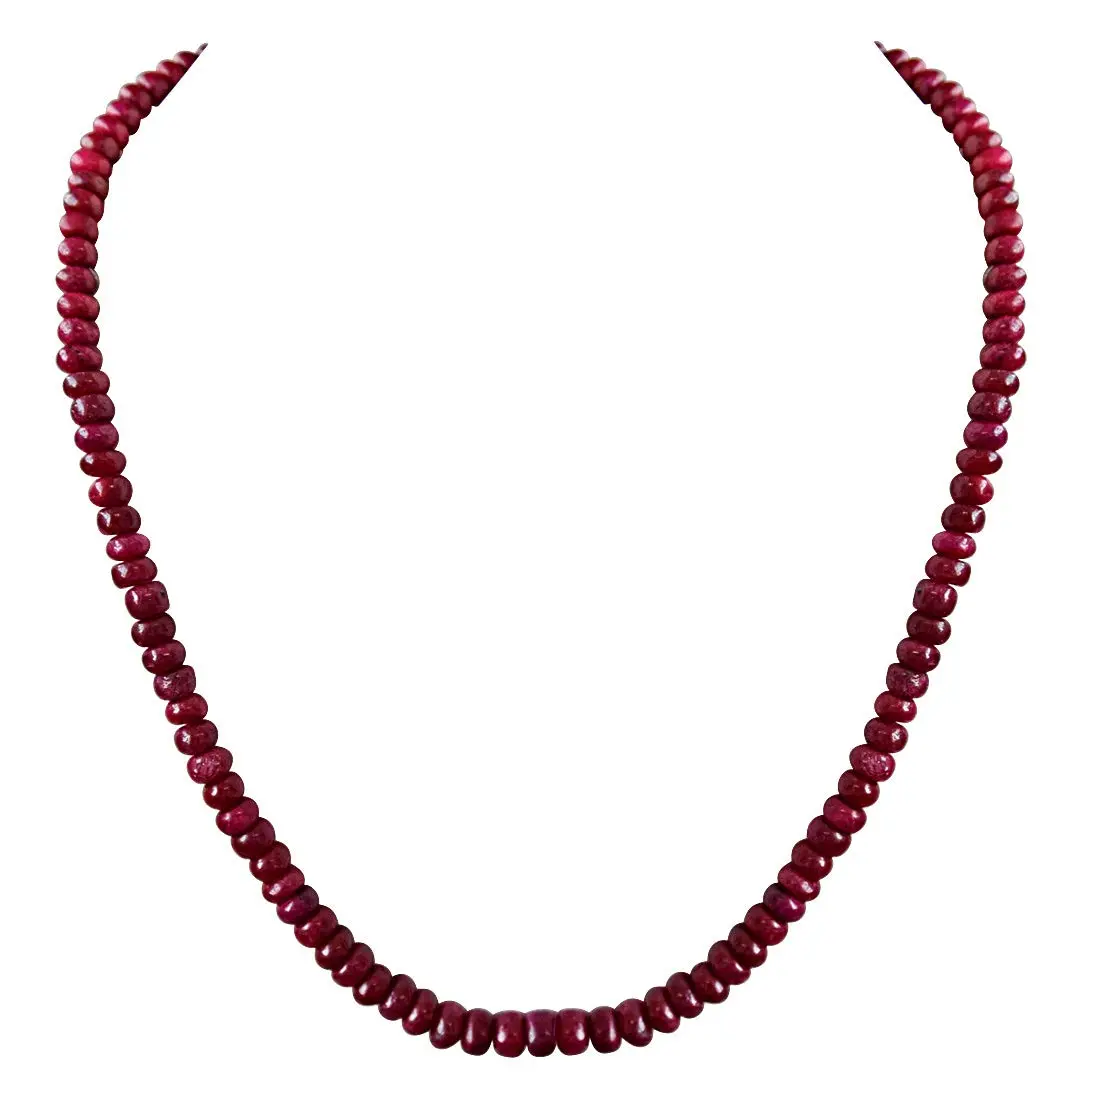 129cts Single Line Real Dark Maroon Ruby Beads Necklace for Women (129ctsRubyNeck)